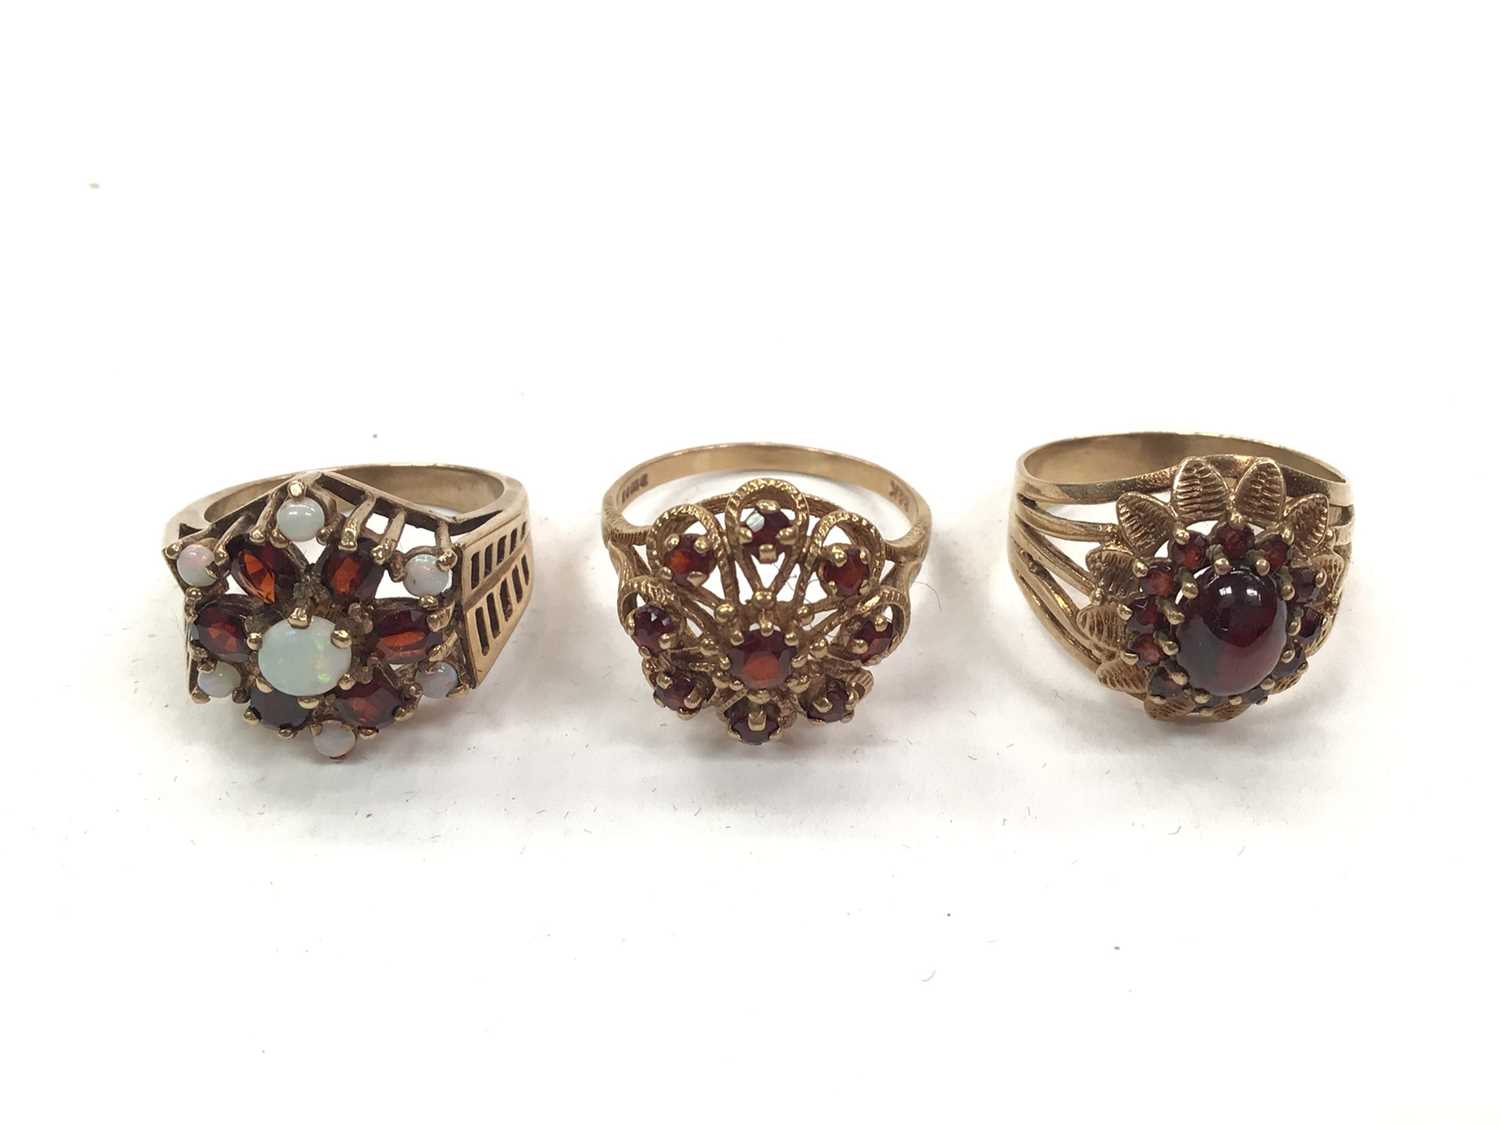 9ct gold opal and garent cluster ring and two other 9ct gold garnet cluster rings (3)